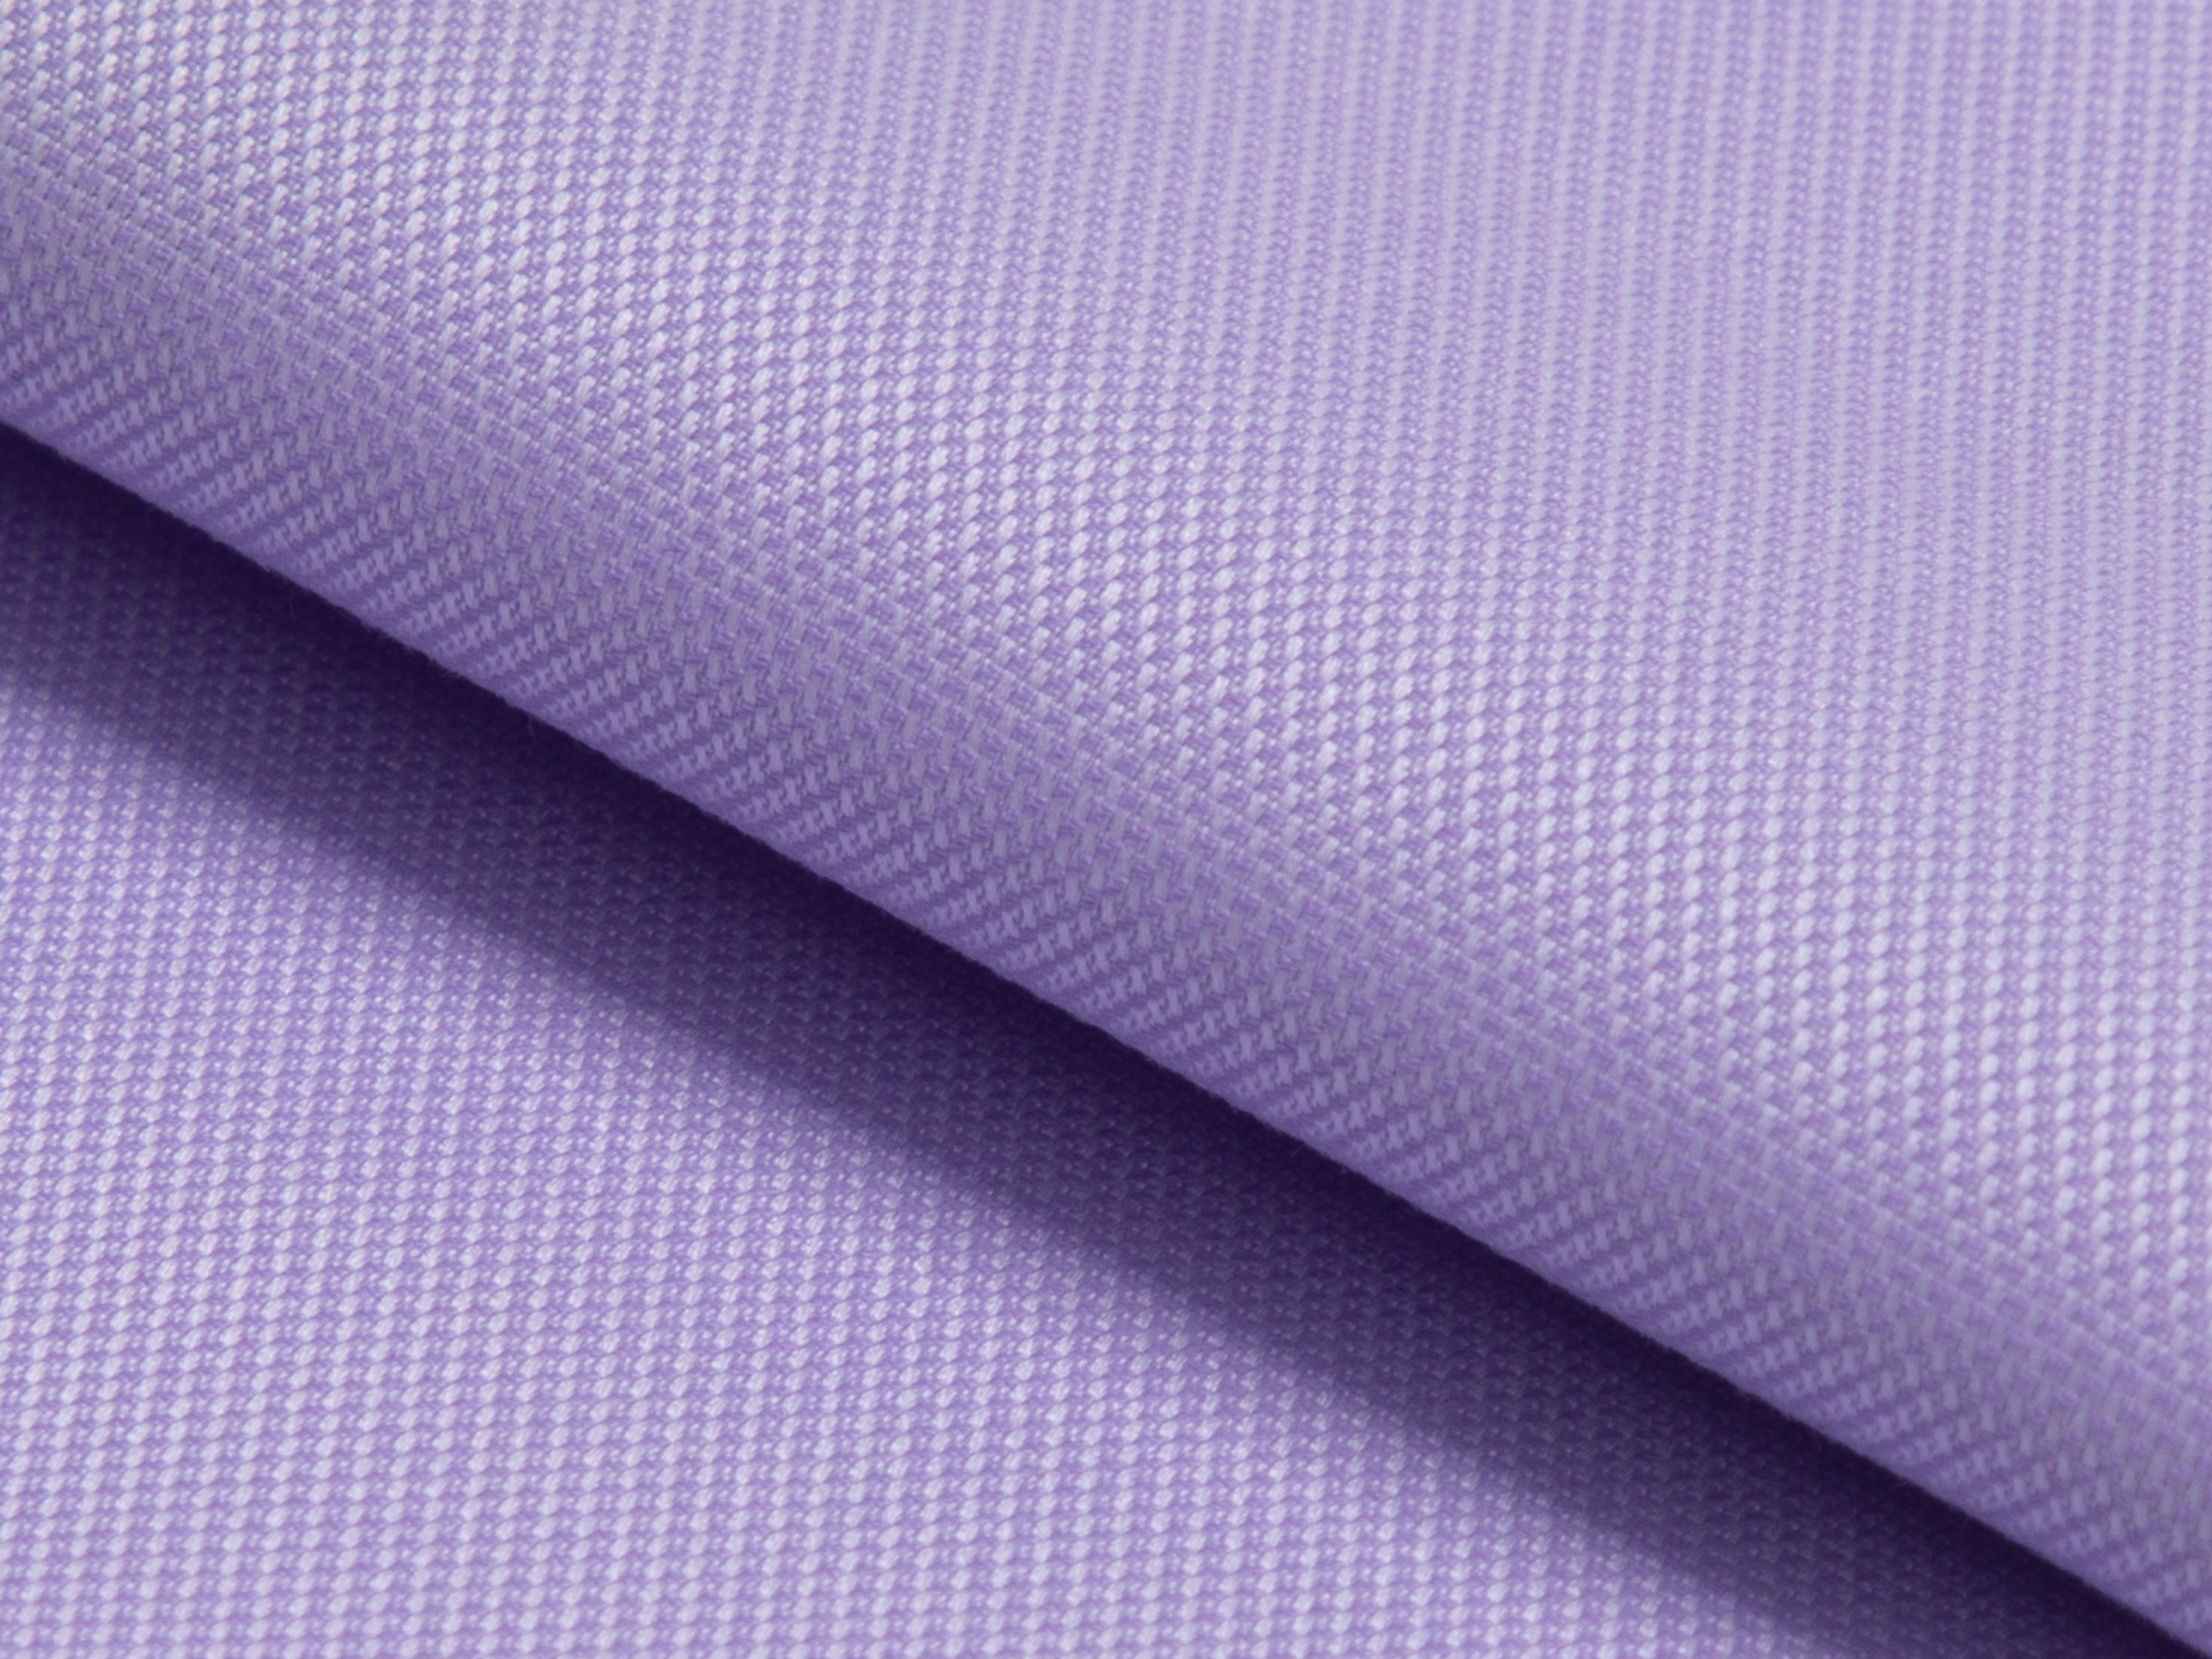 Buy tailor made shirts online - MAYFAIR - Pinpoint Lilac